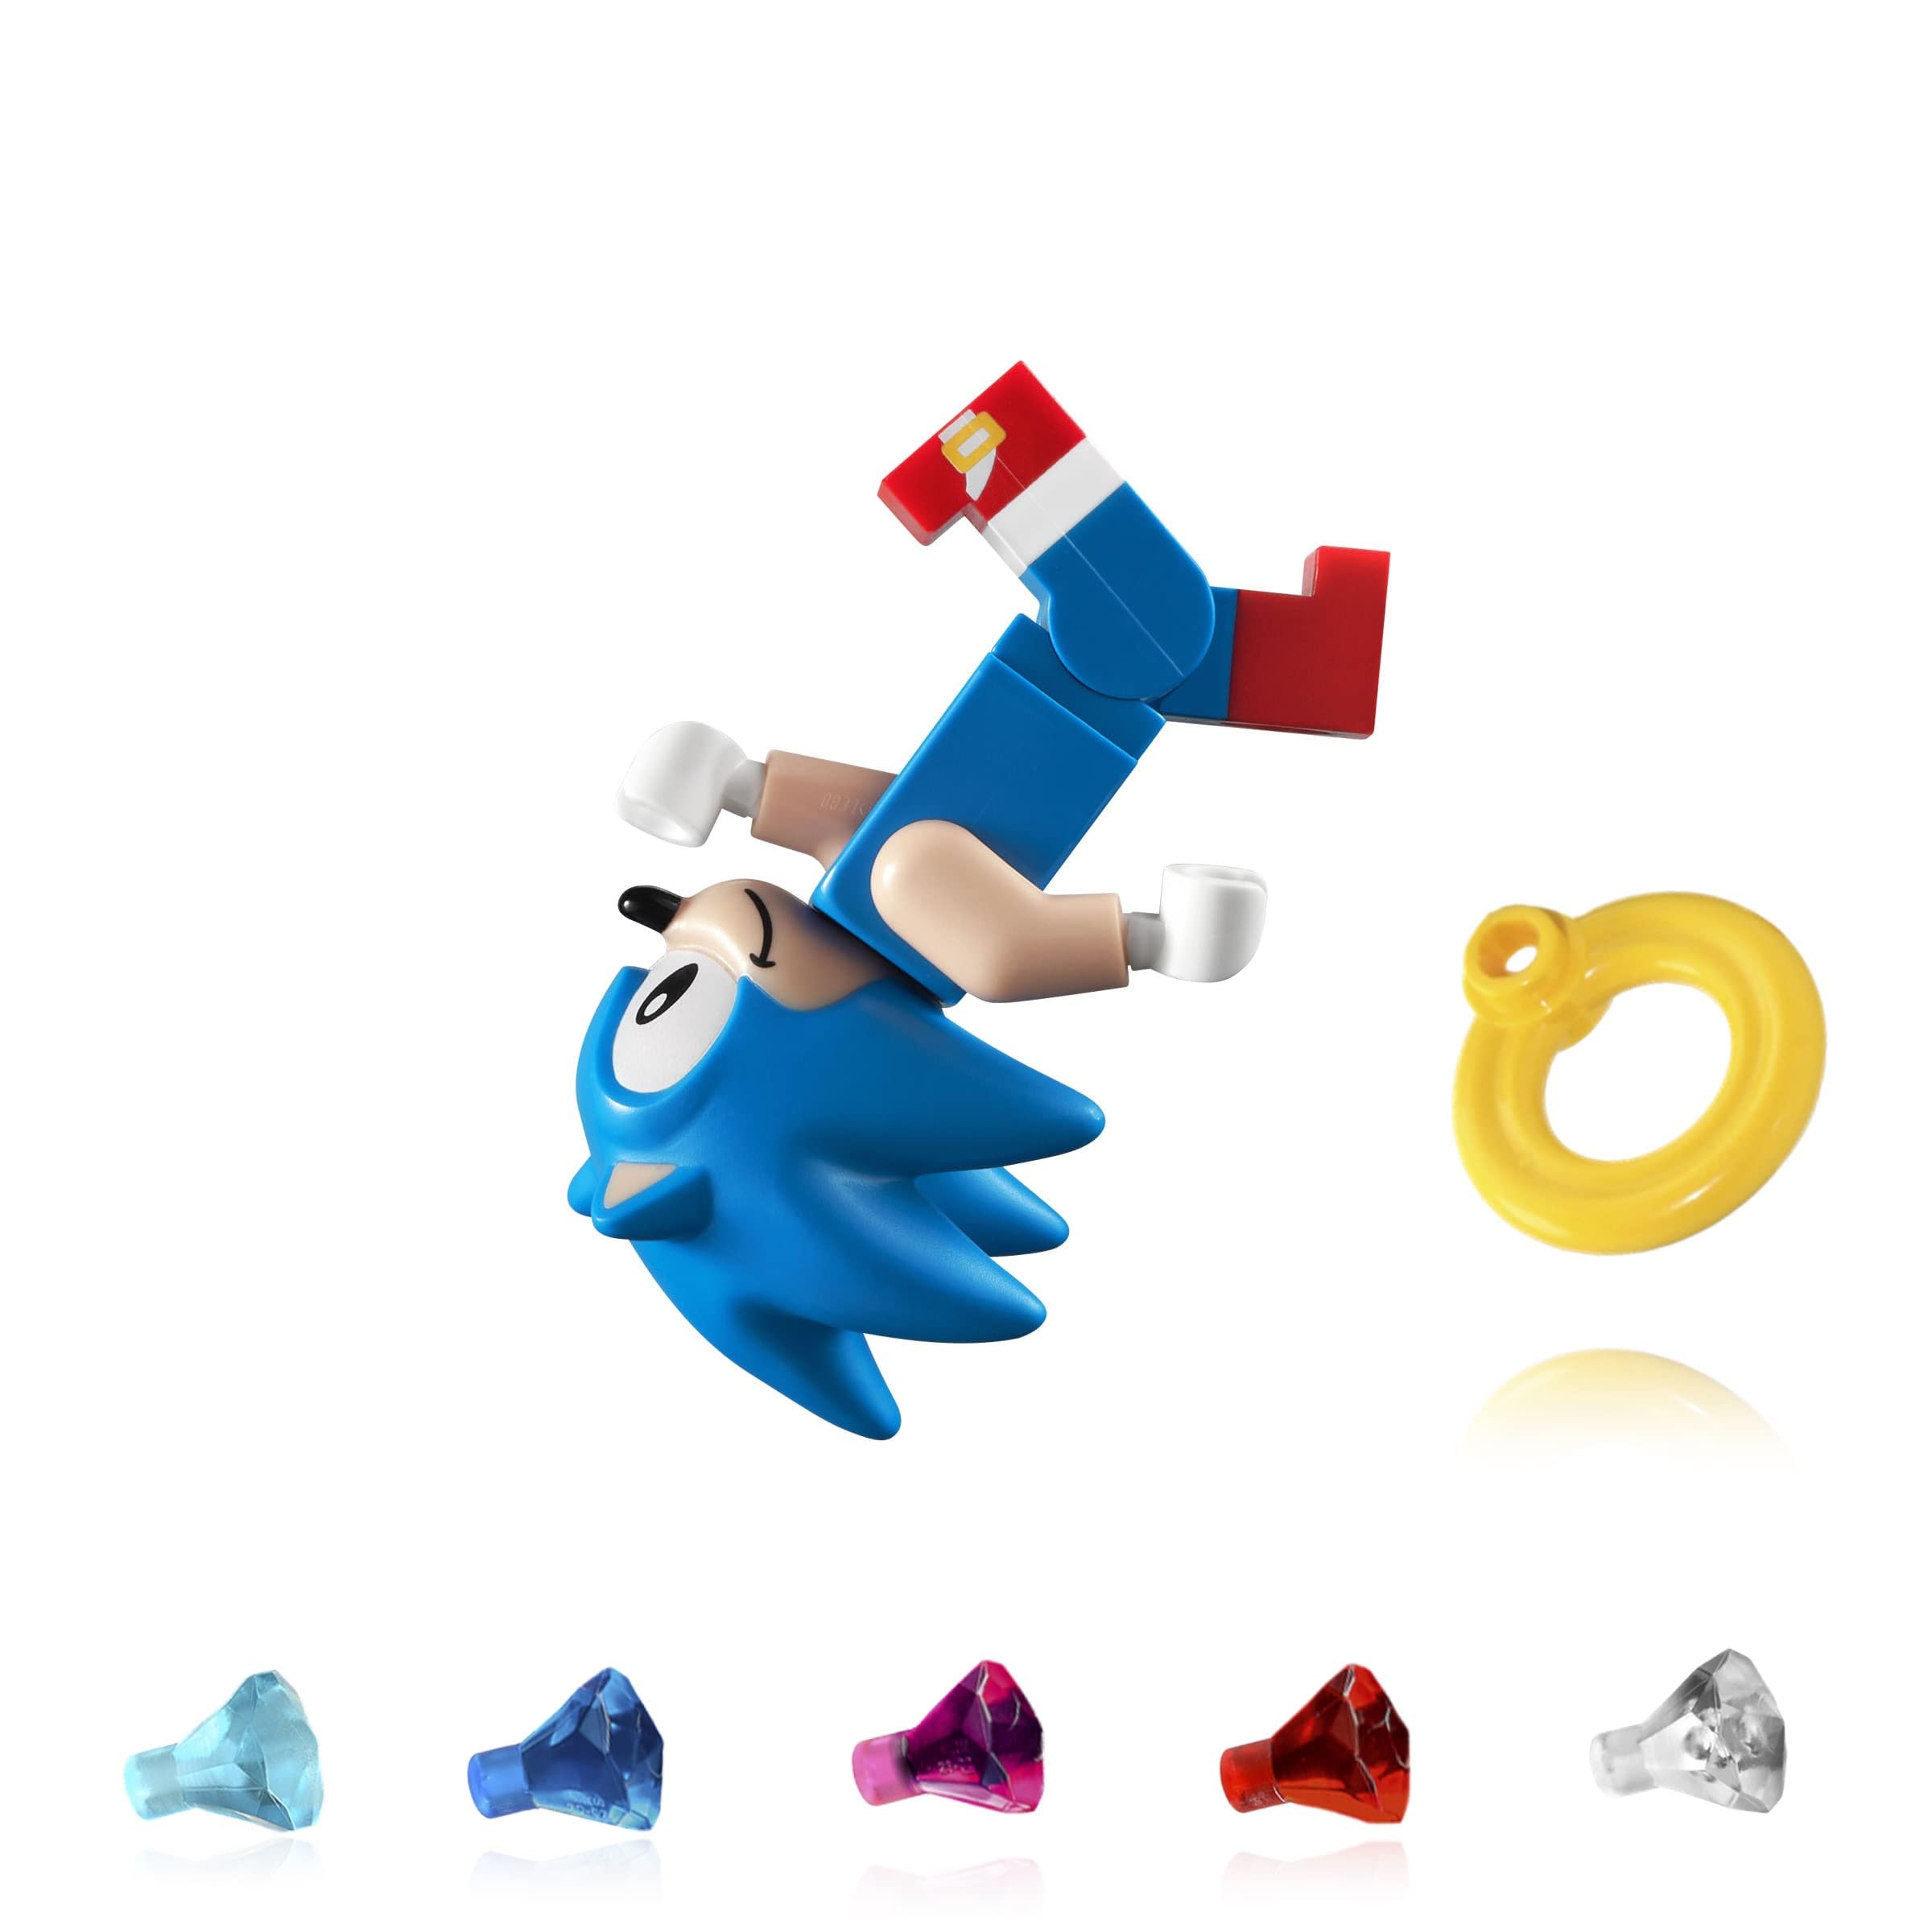 LEGO Ideas Minifigure - Sonic The Hedgehog with Accessories (All New for 2022) 21331